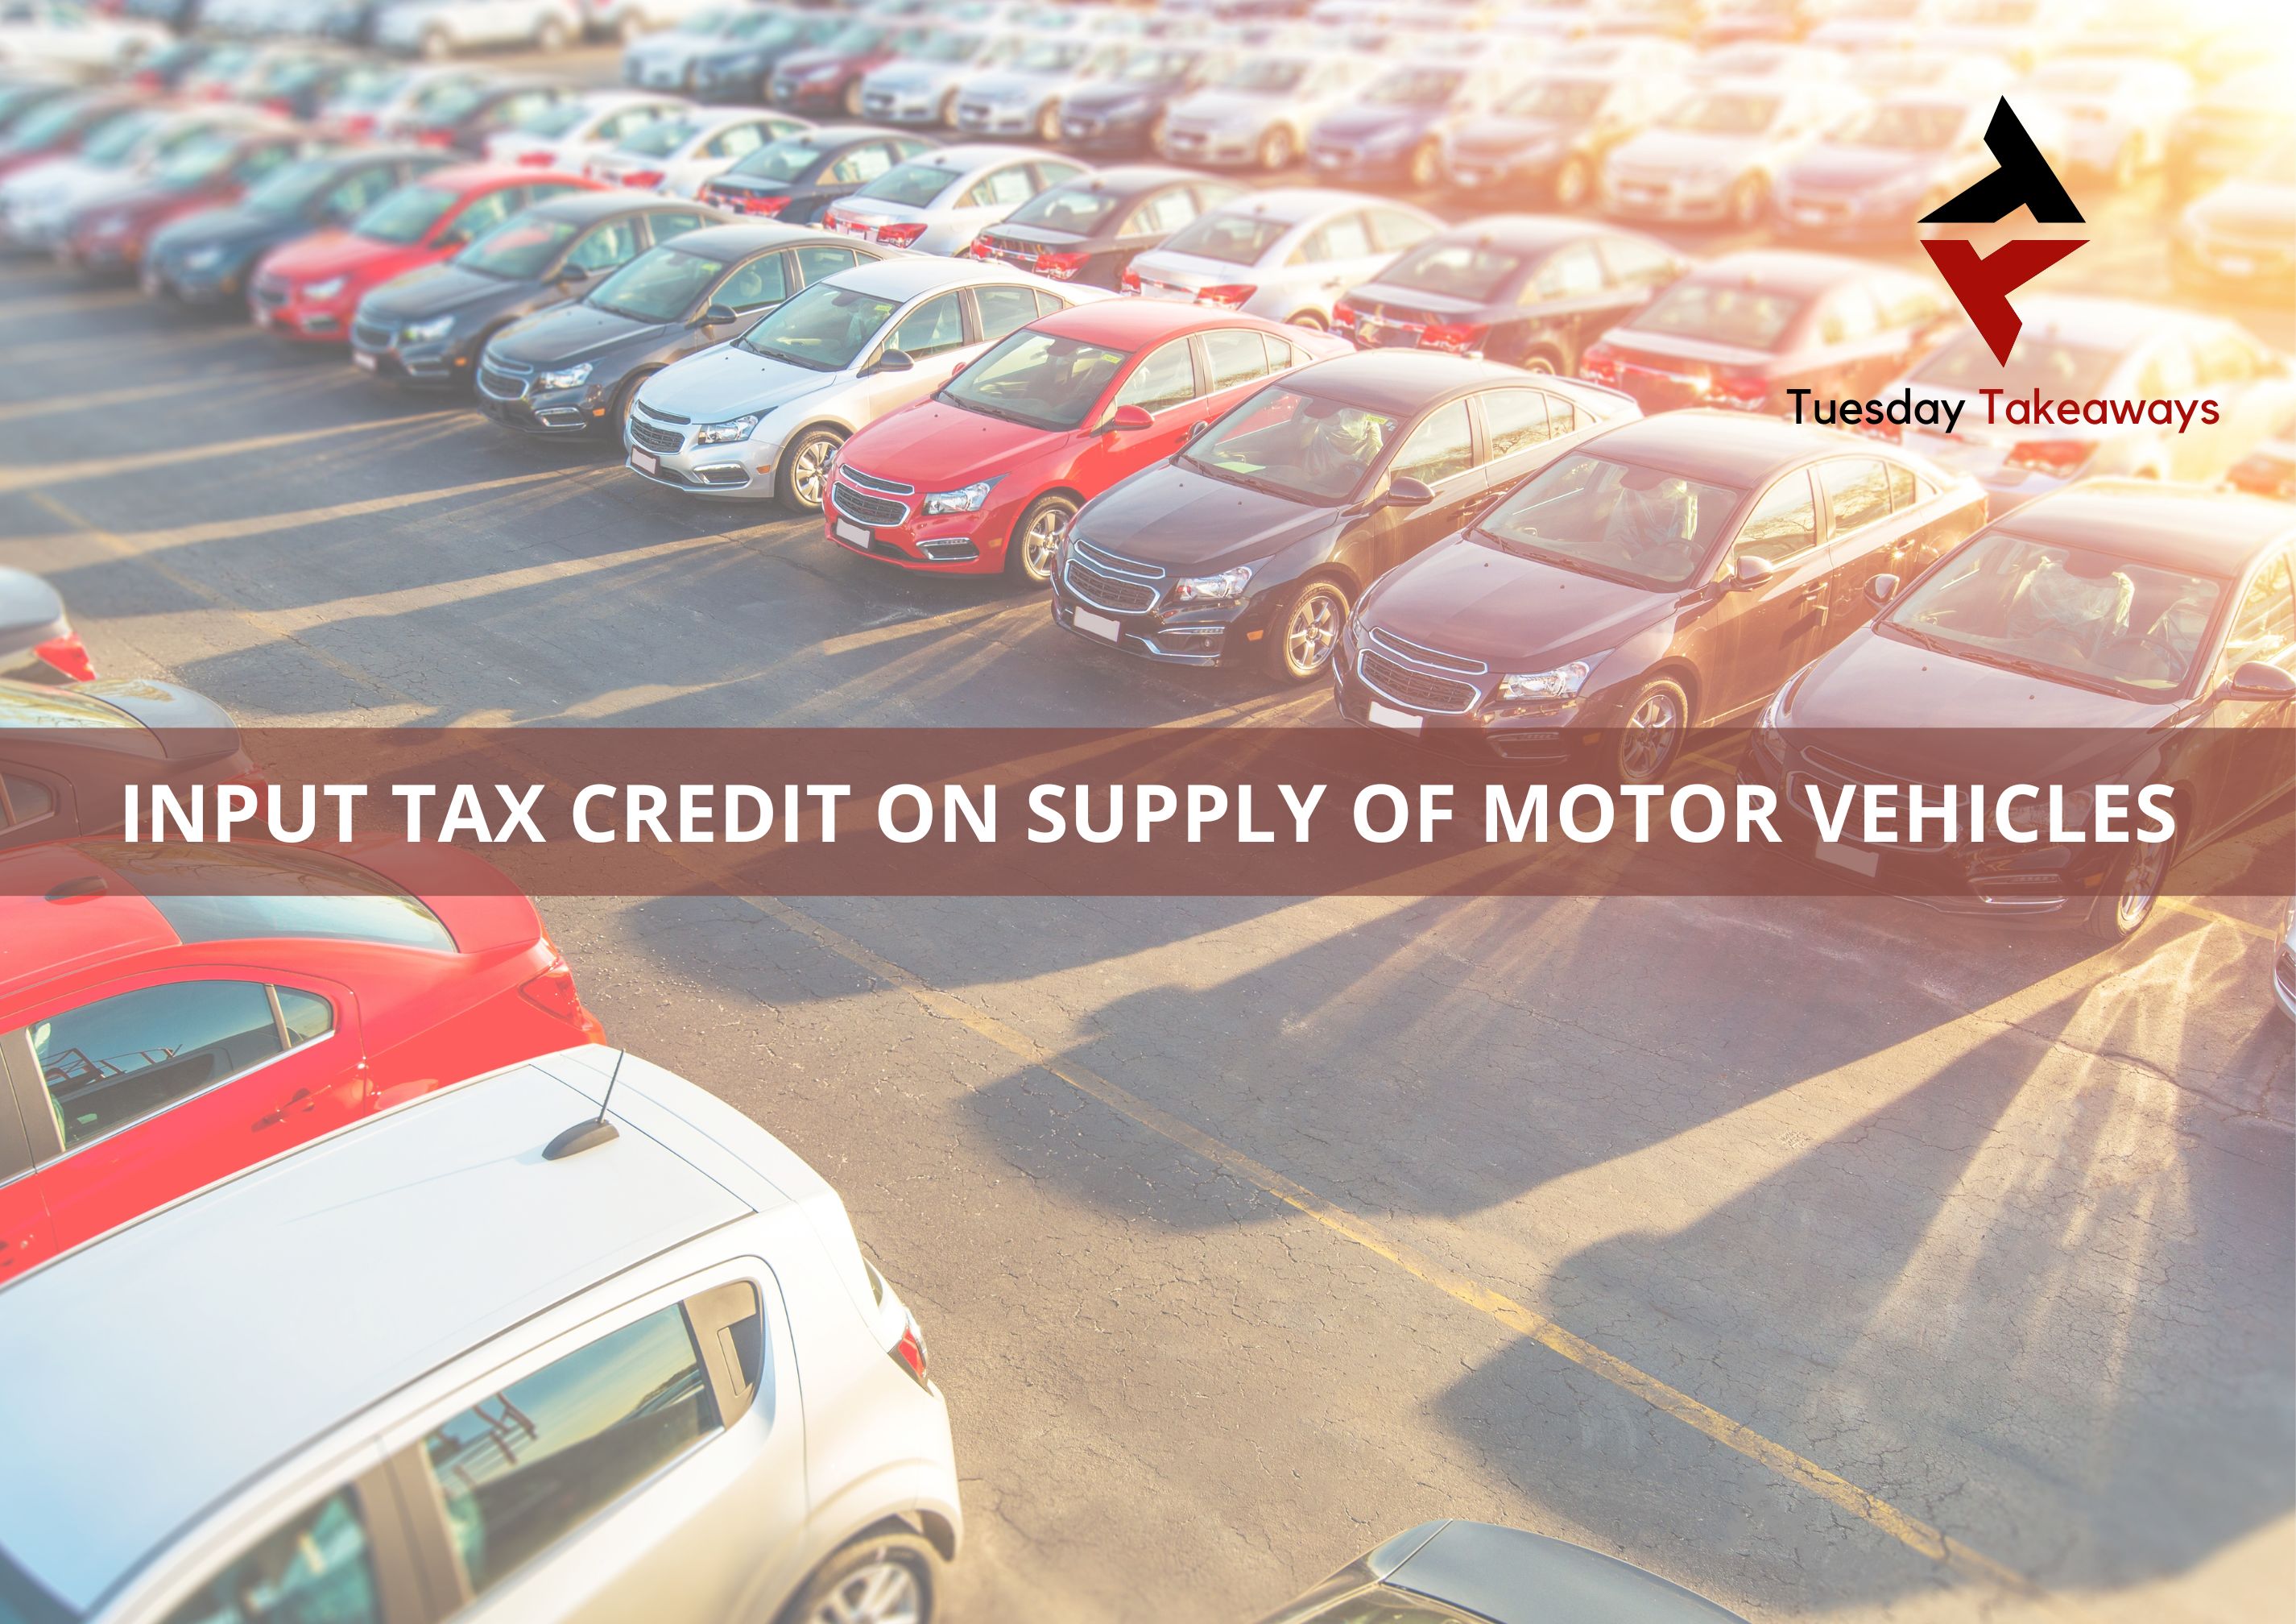 Input Tax Credit on Supply of Motor Vehicles